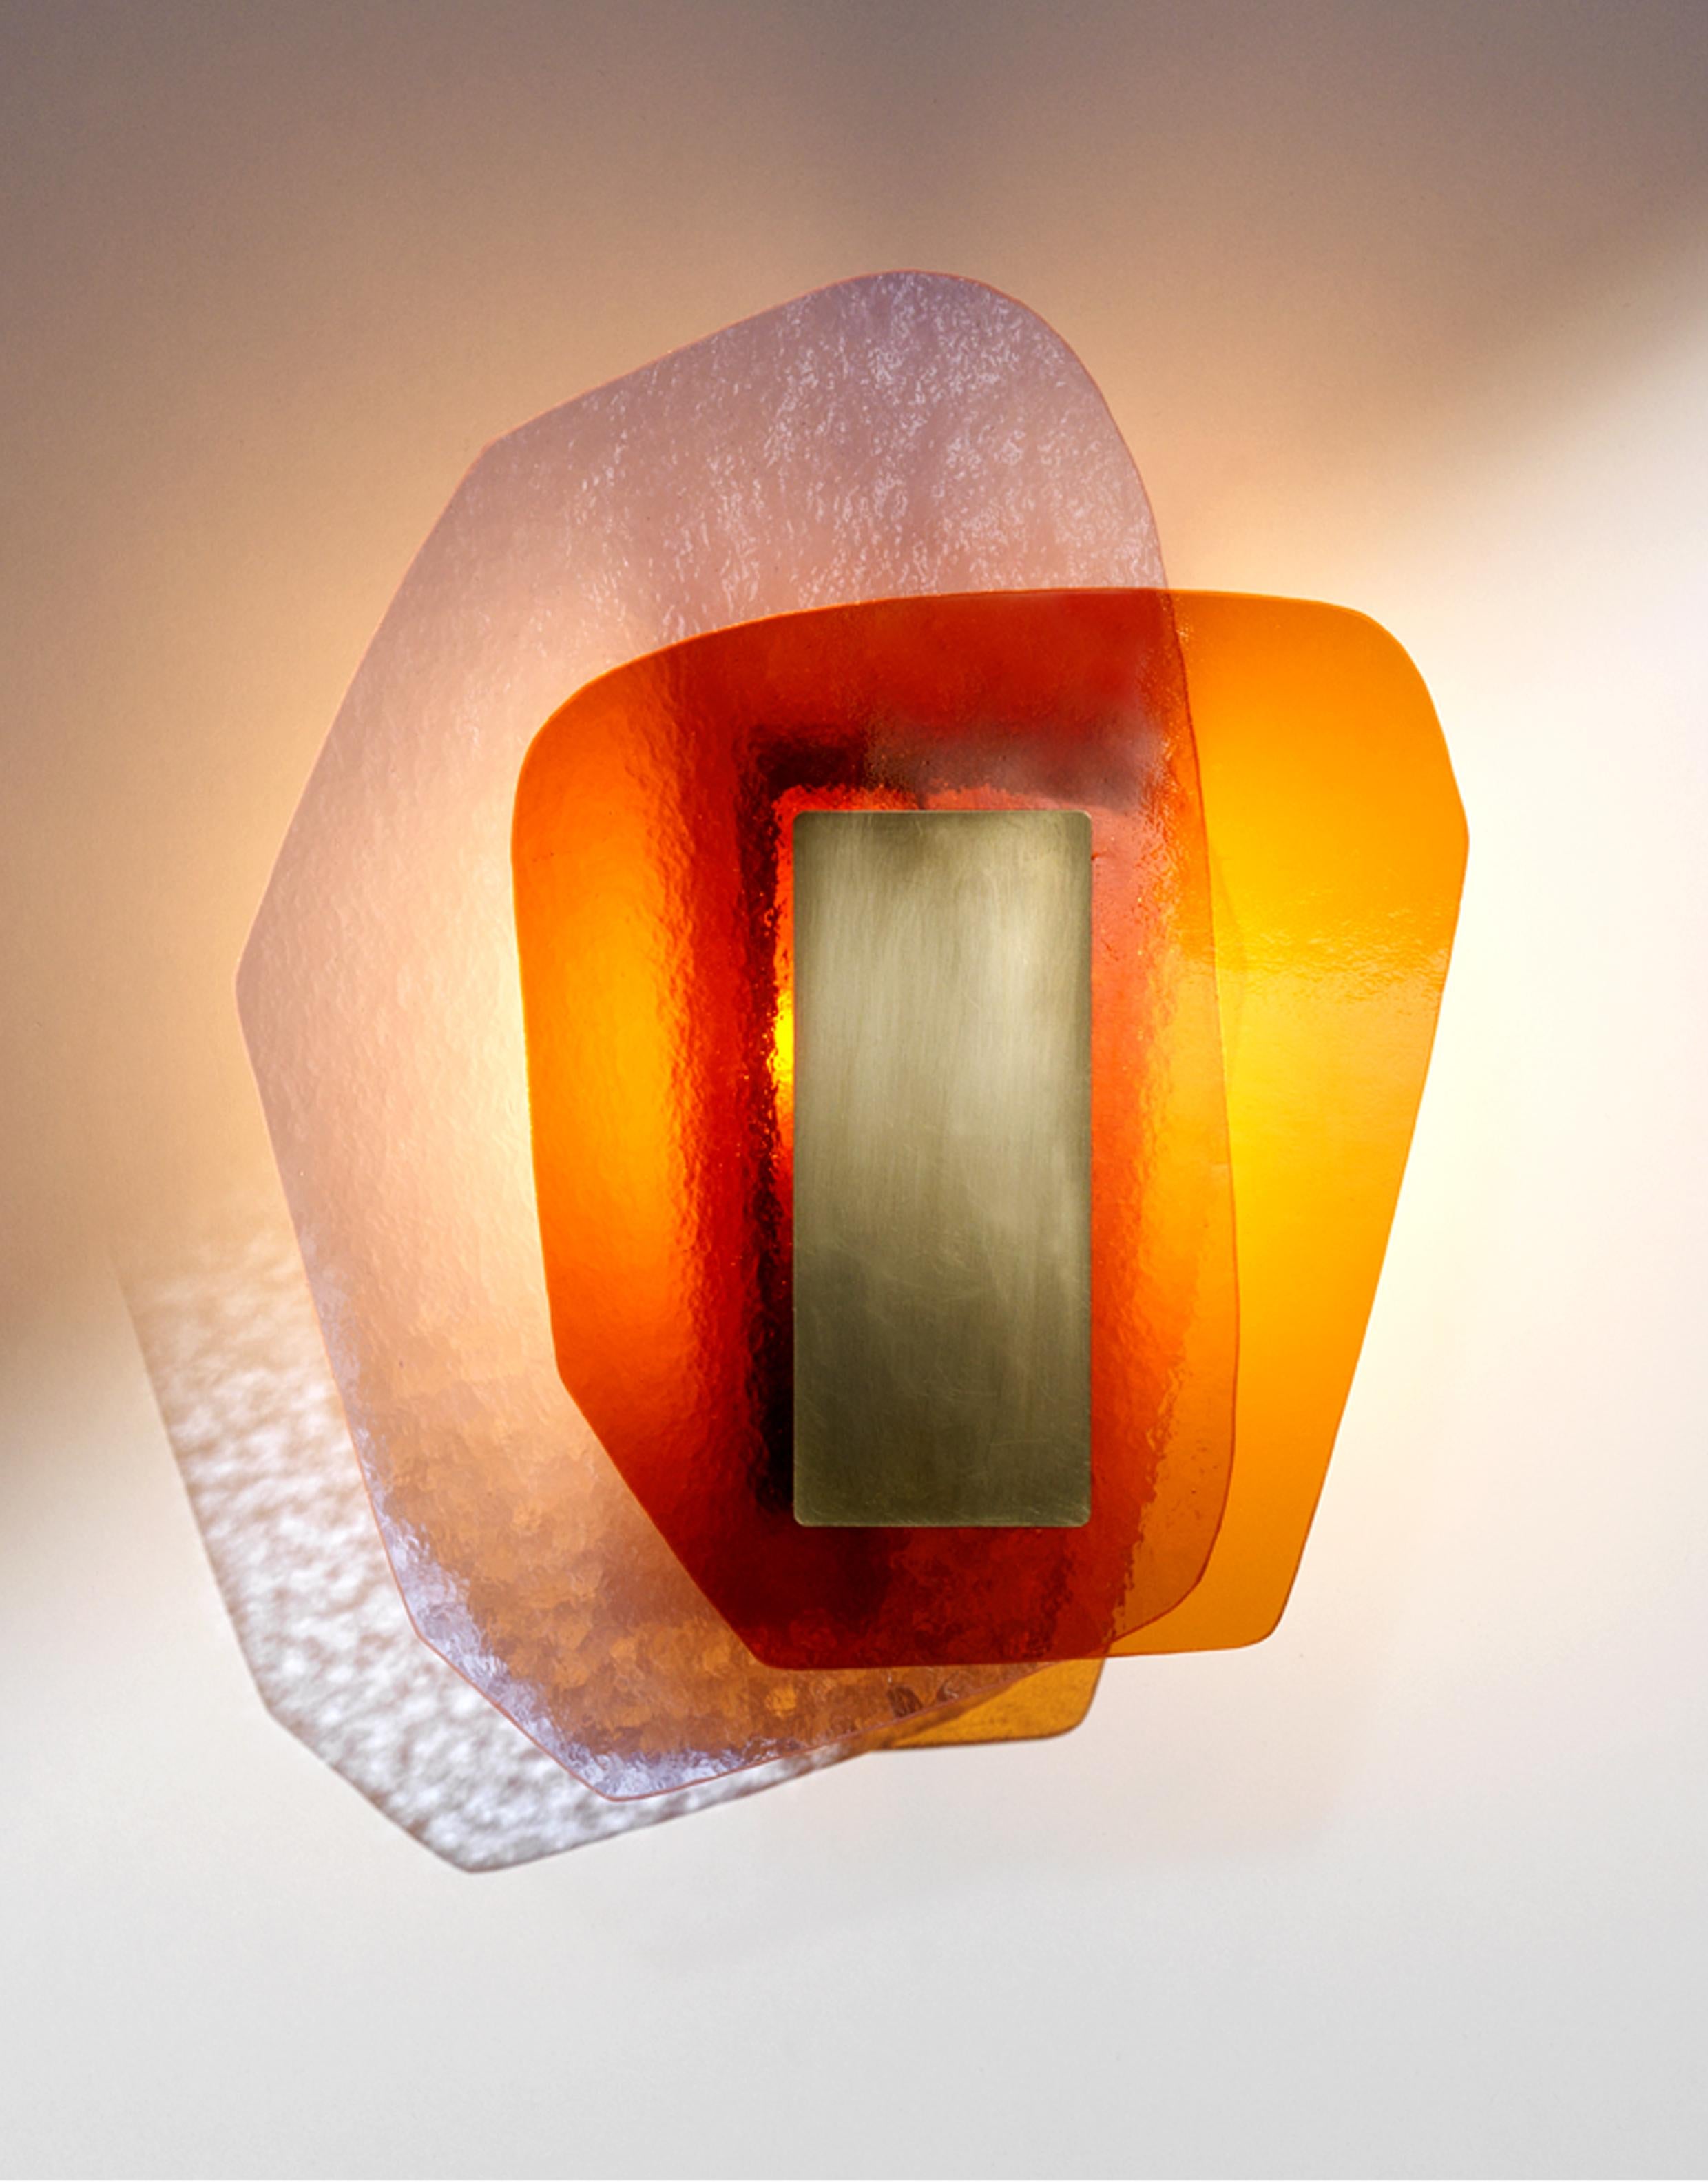 Unity light sculpture by Marie Jeunet.
Dimensions: H 34 x L 26 cm.
Materials: Lilac hammered glass sheet, smooth amber glass sheet, brushed brass structure and finish.

Les Precieux
These luminous sculptures evolve with the rhythm of the